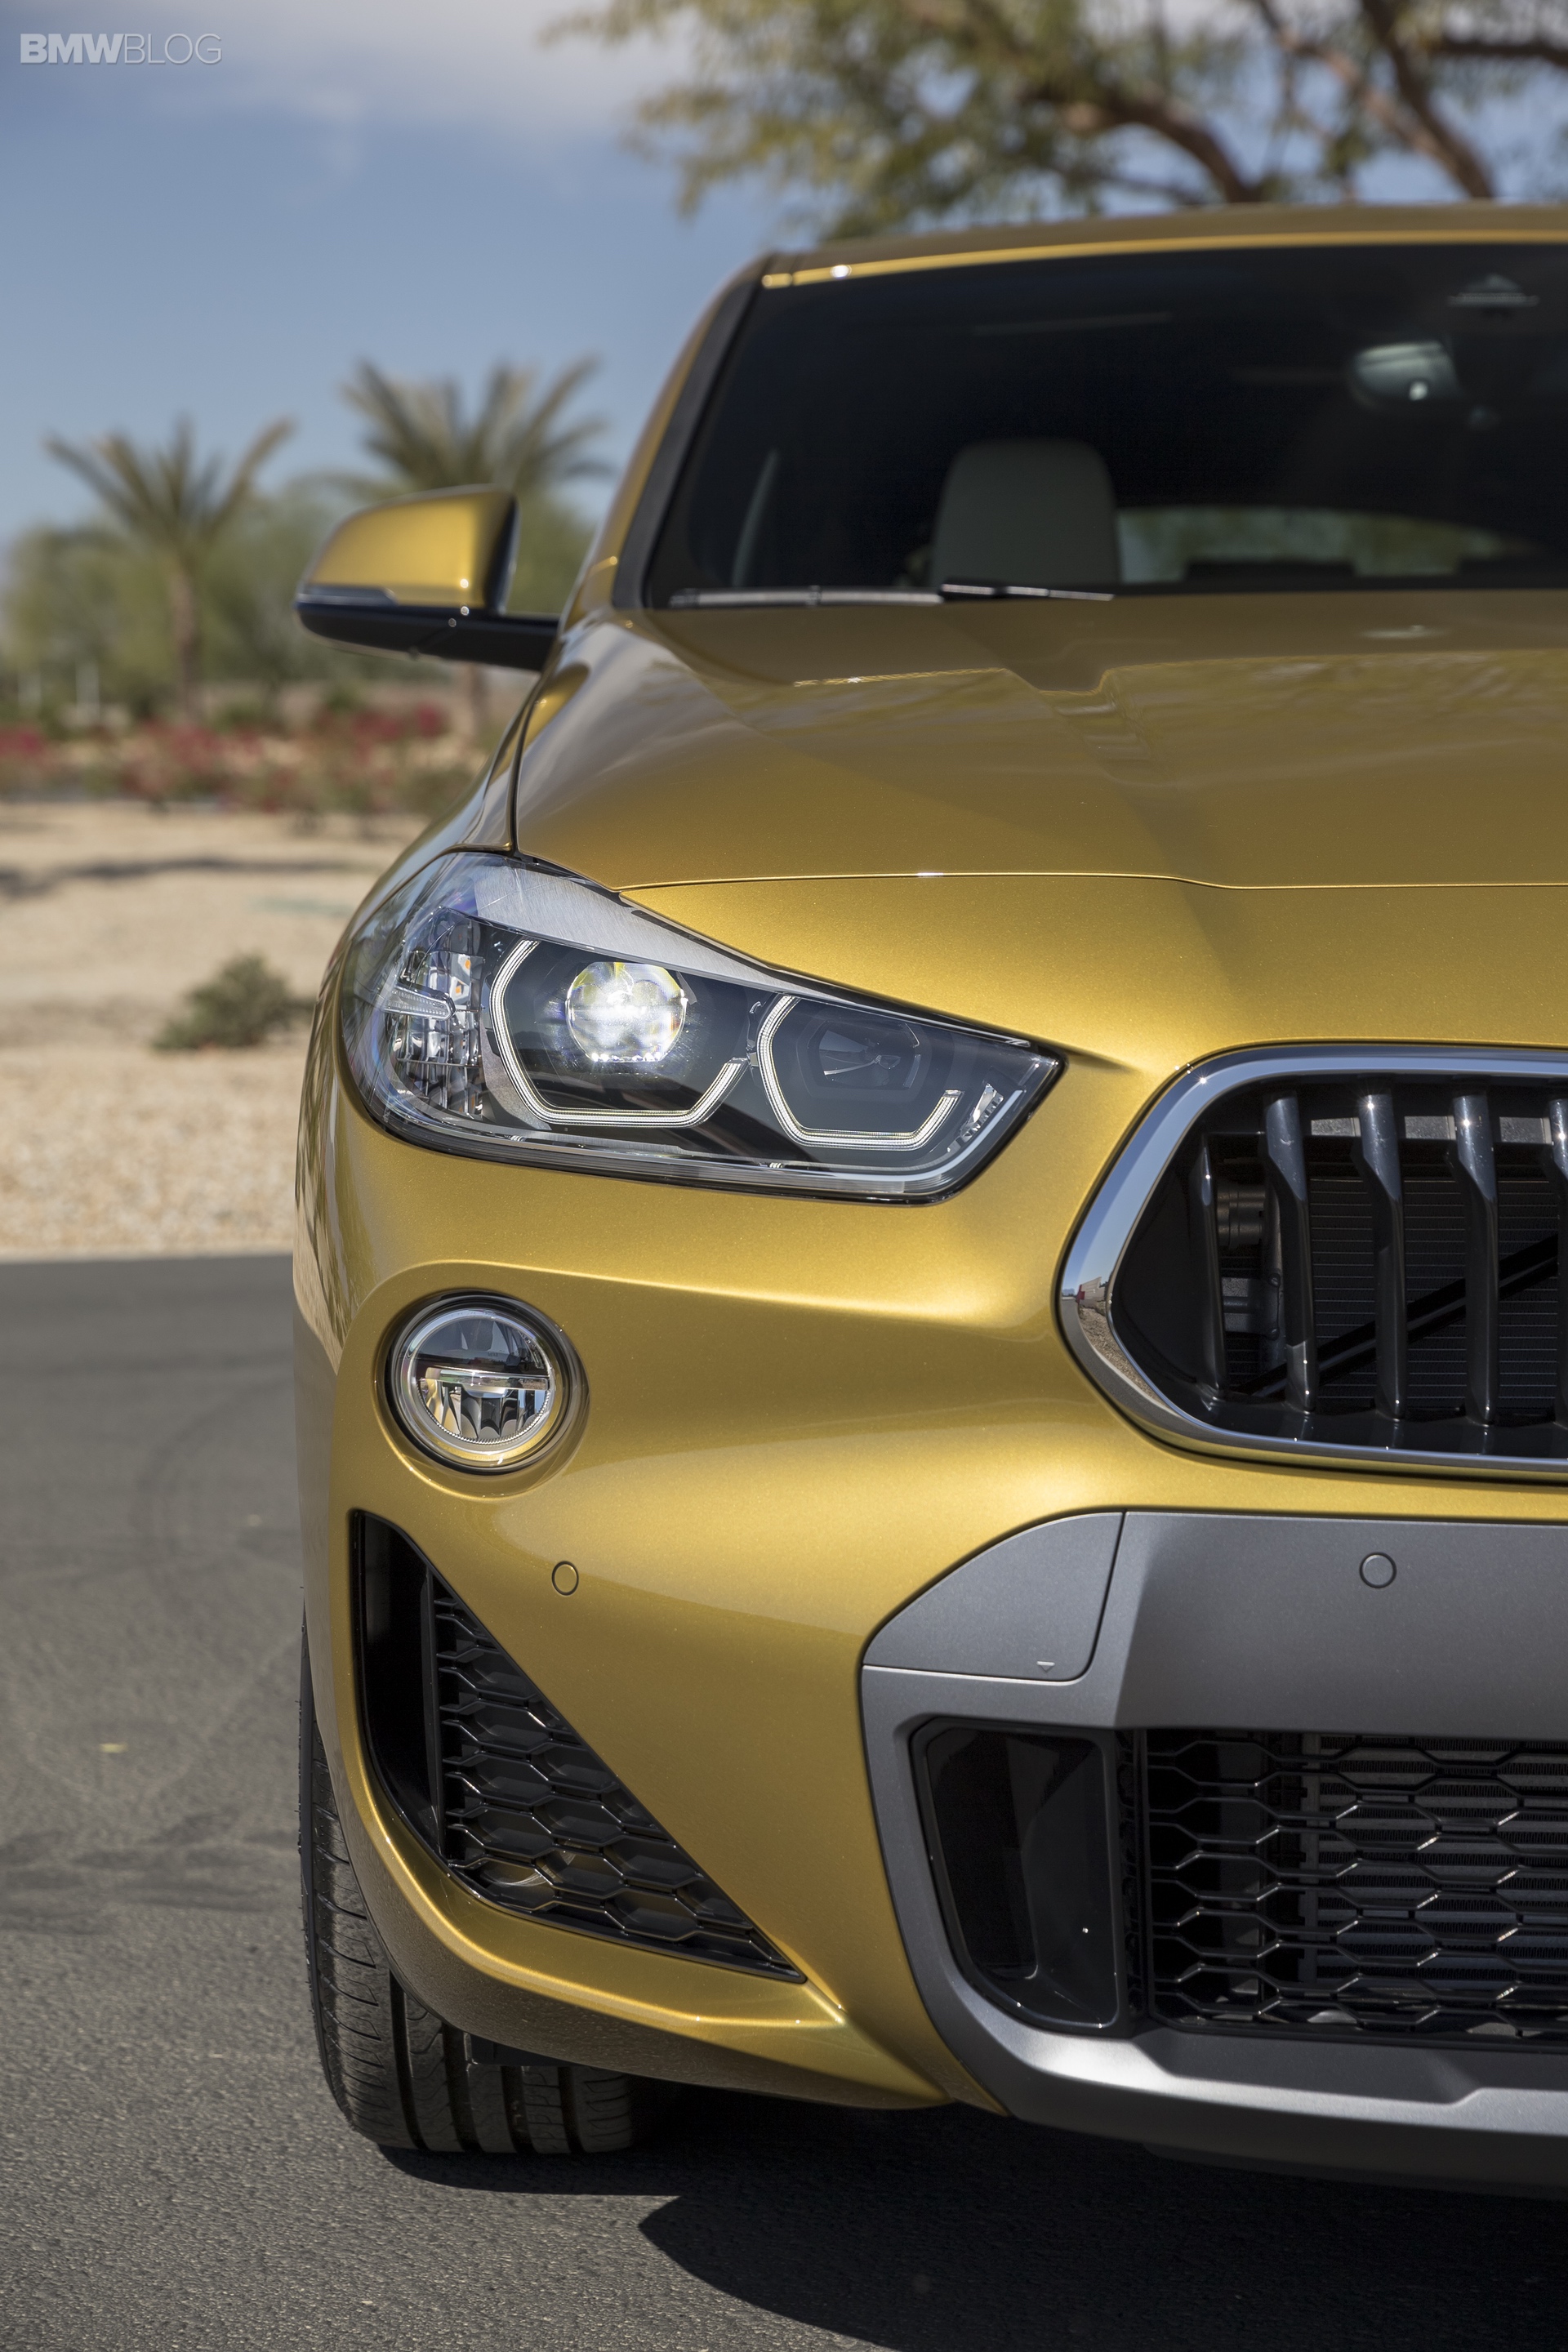 FIRST DRIVE: BMW X2 xDrive28i -- Defying the Odds